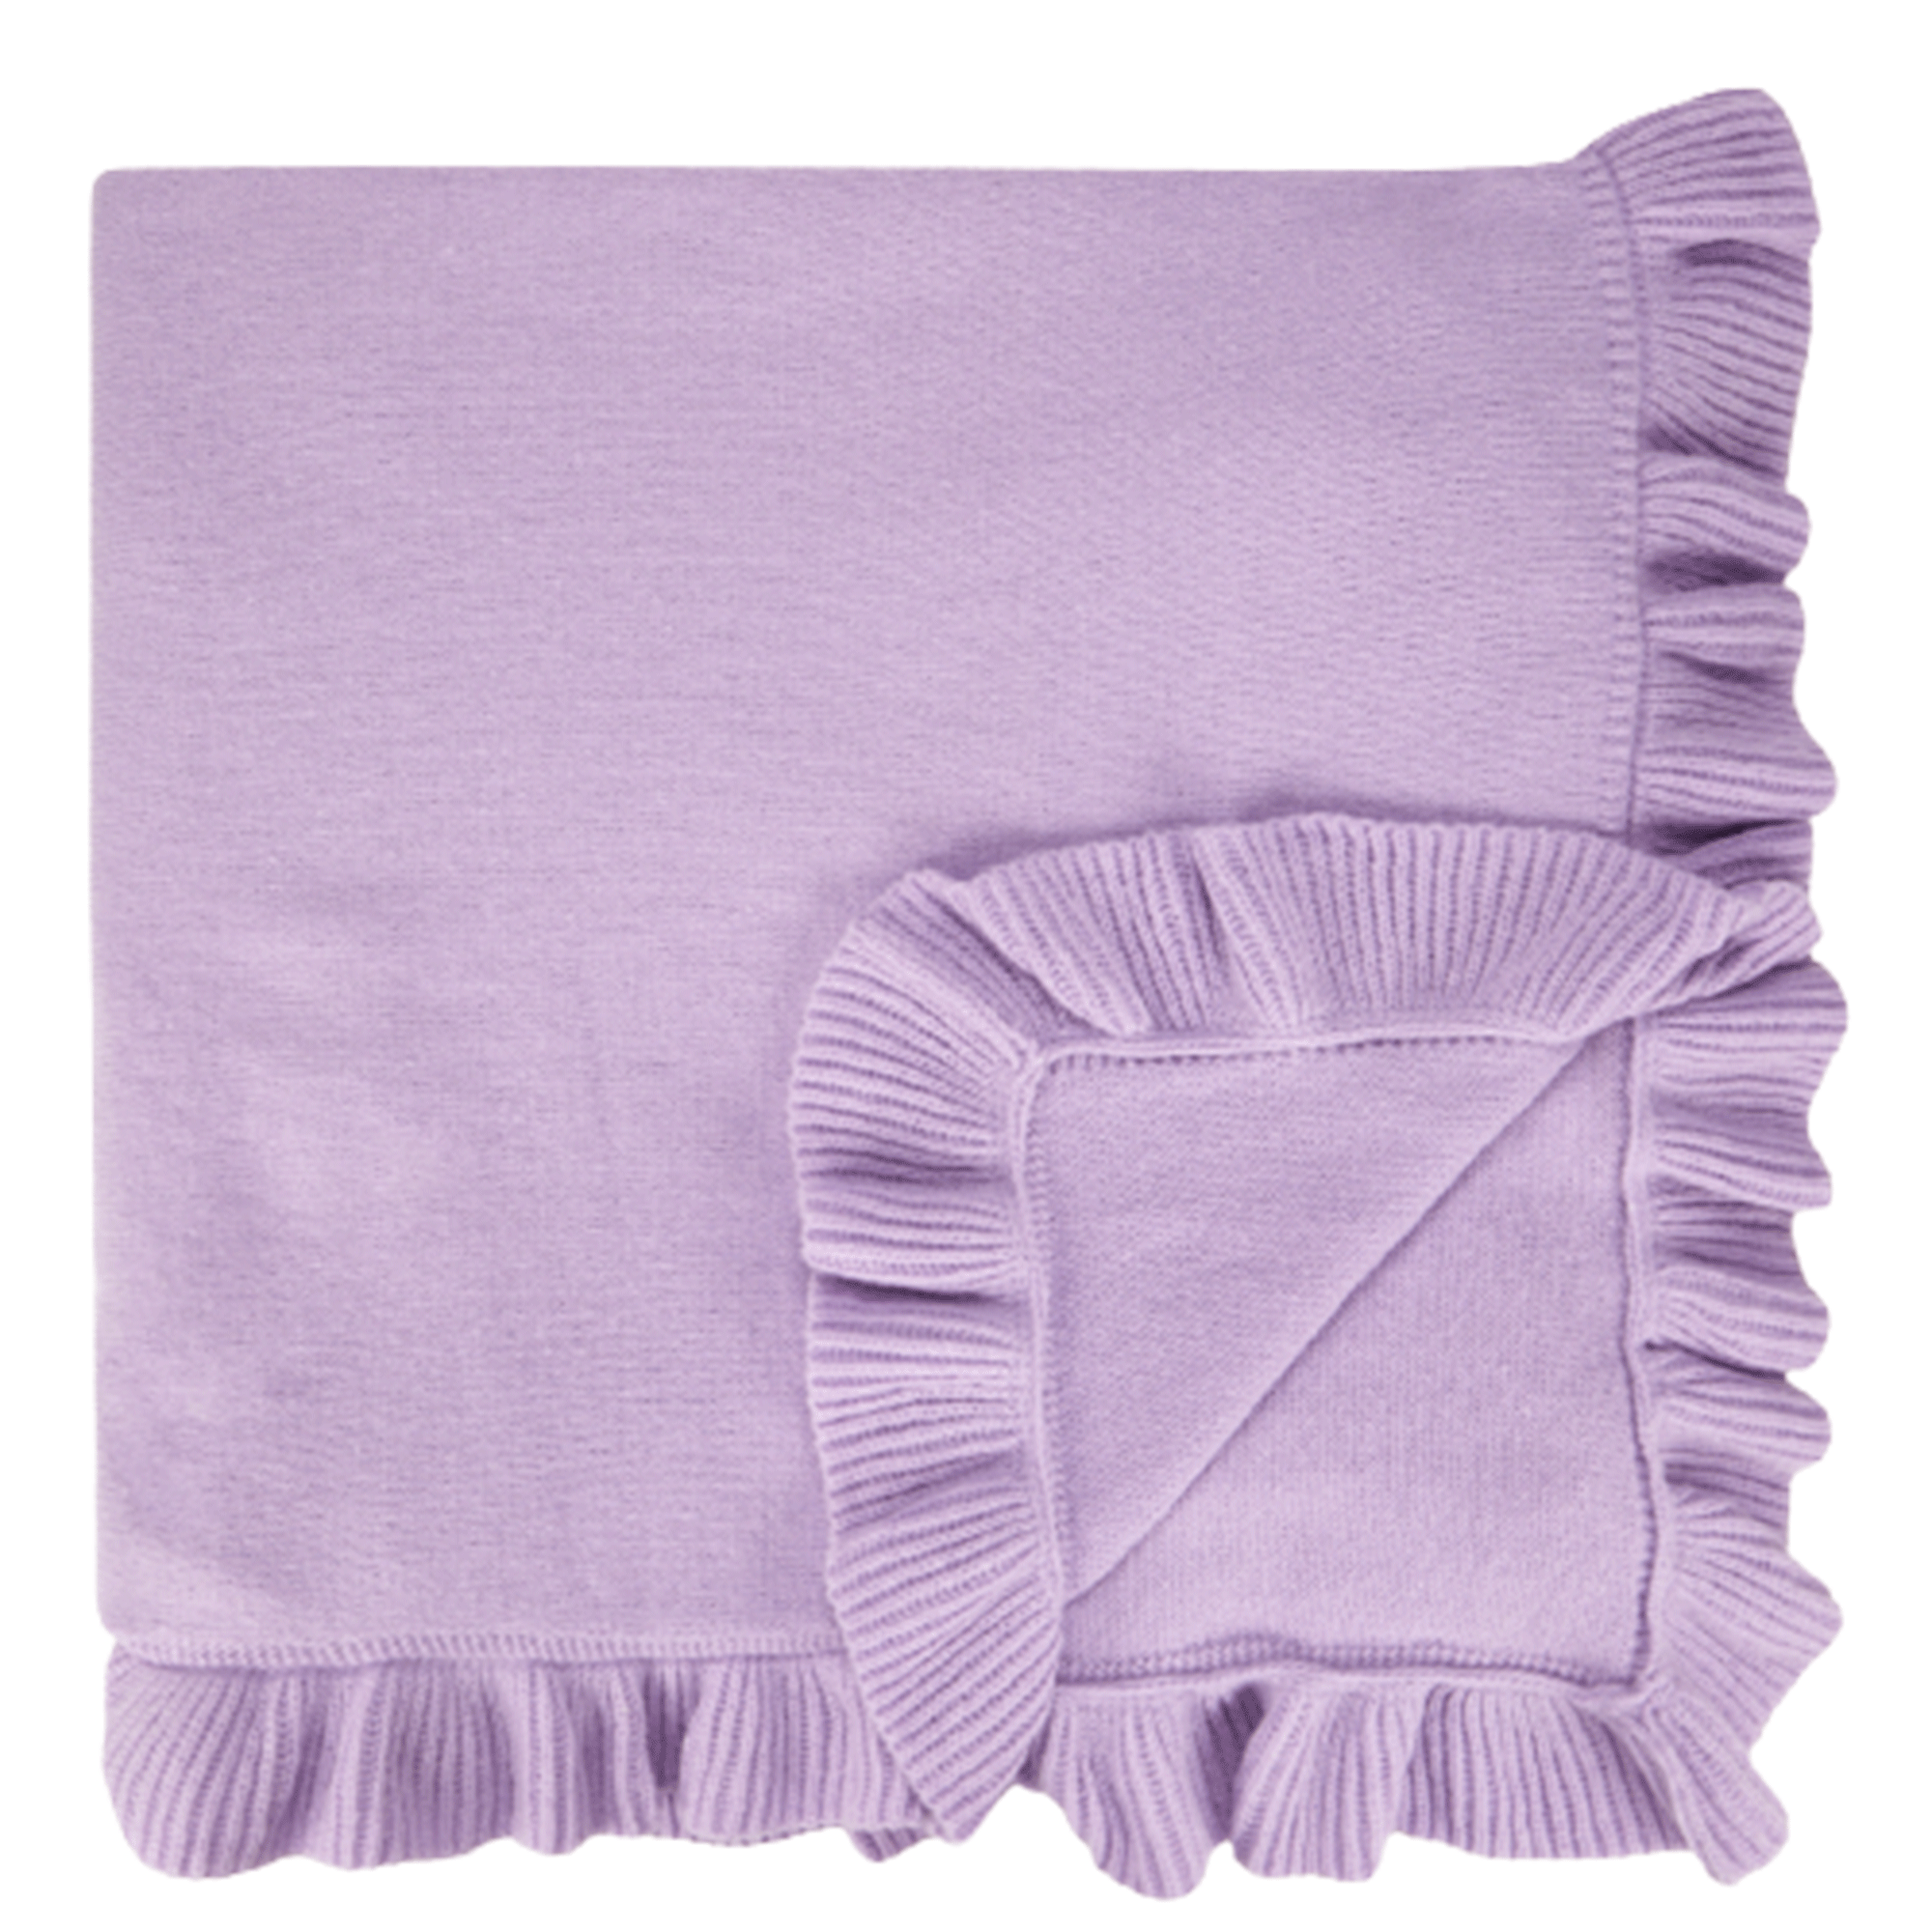 Lilac frill blanket